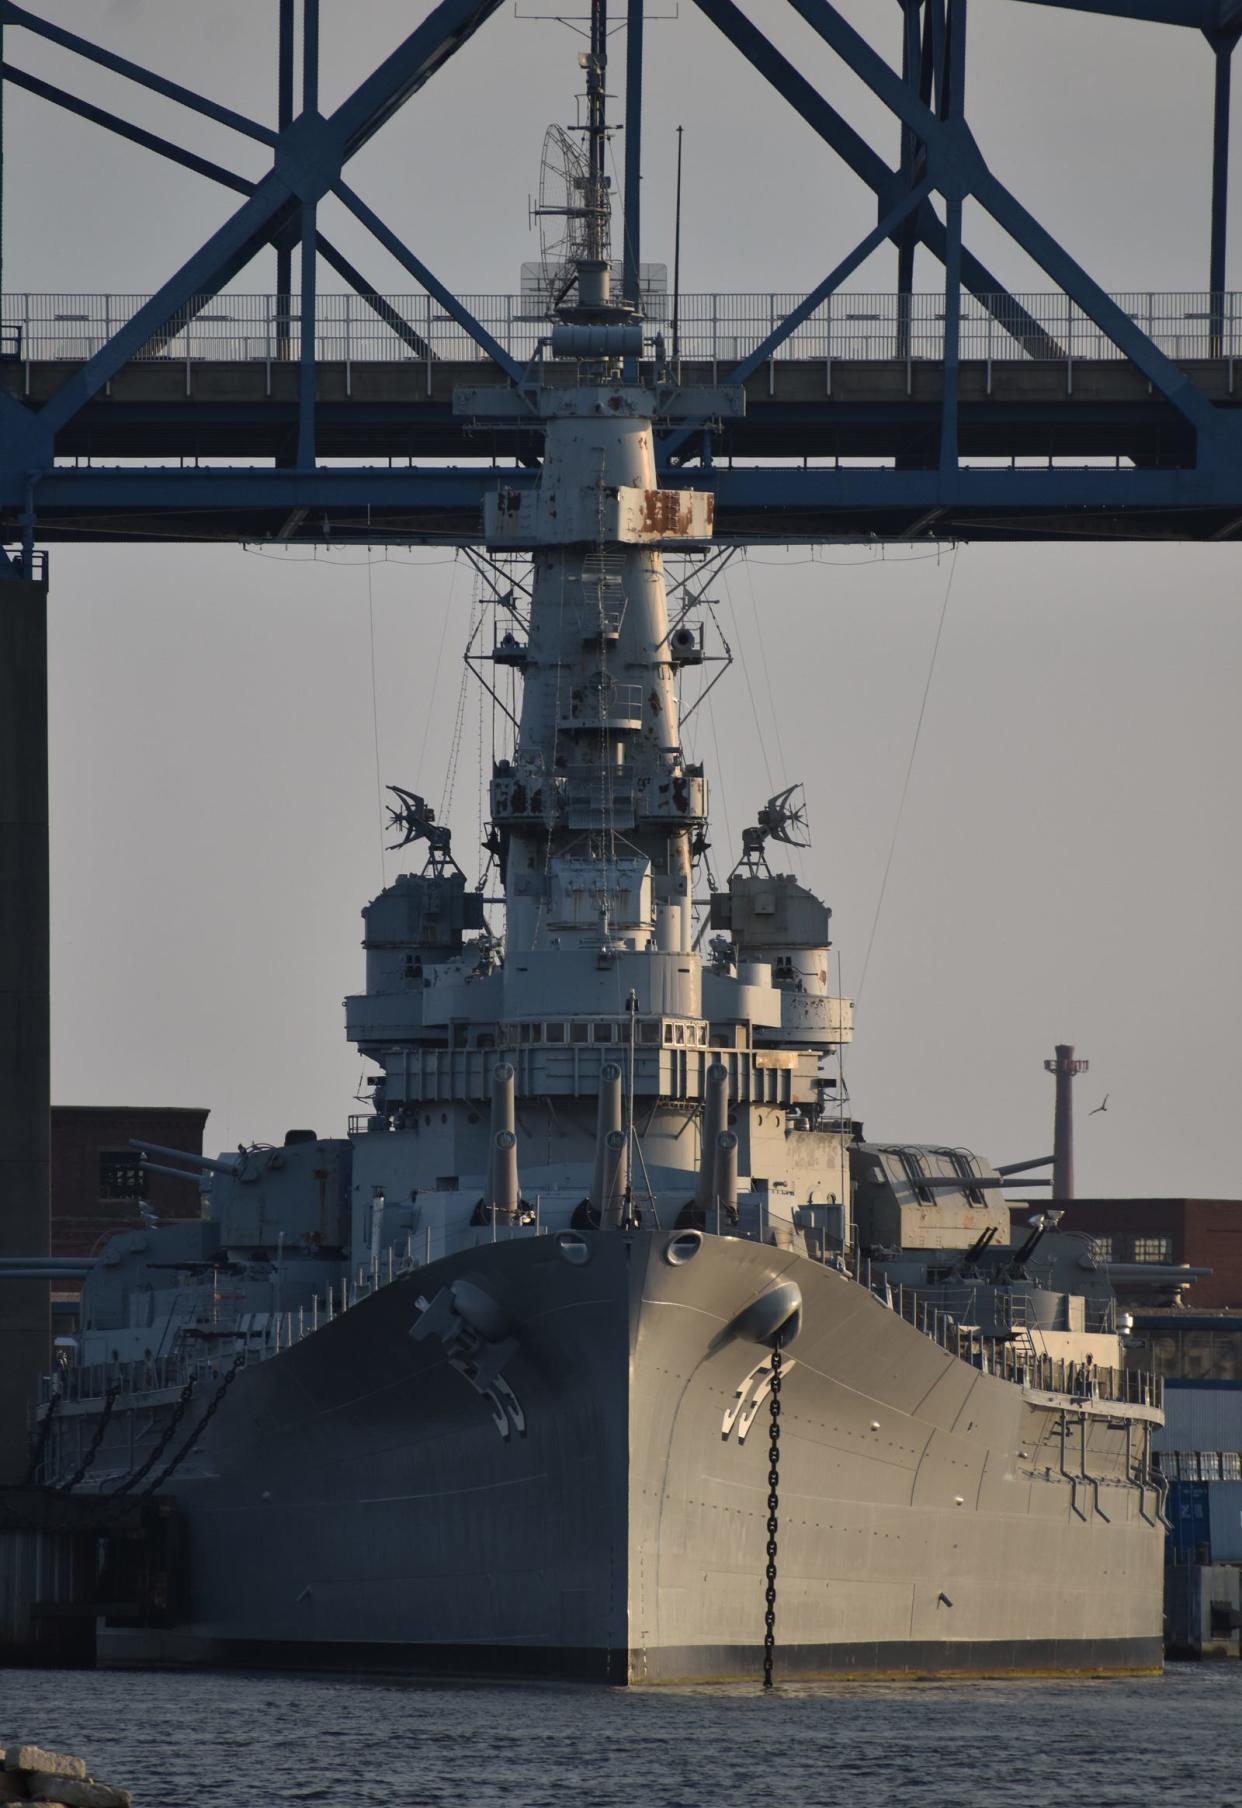 Battleship Cove is among the tourism assets in Fall River. Here, Big Mamie, as Battleship Massachusetts is known locally, is seen in front of the Braga Bridge.